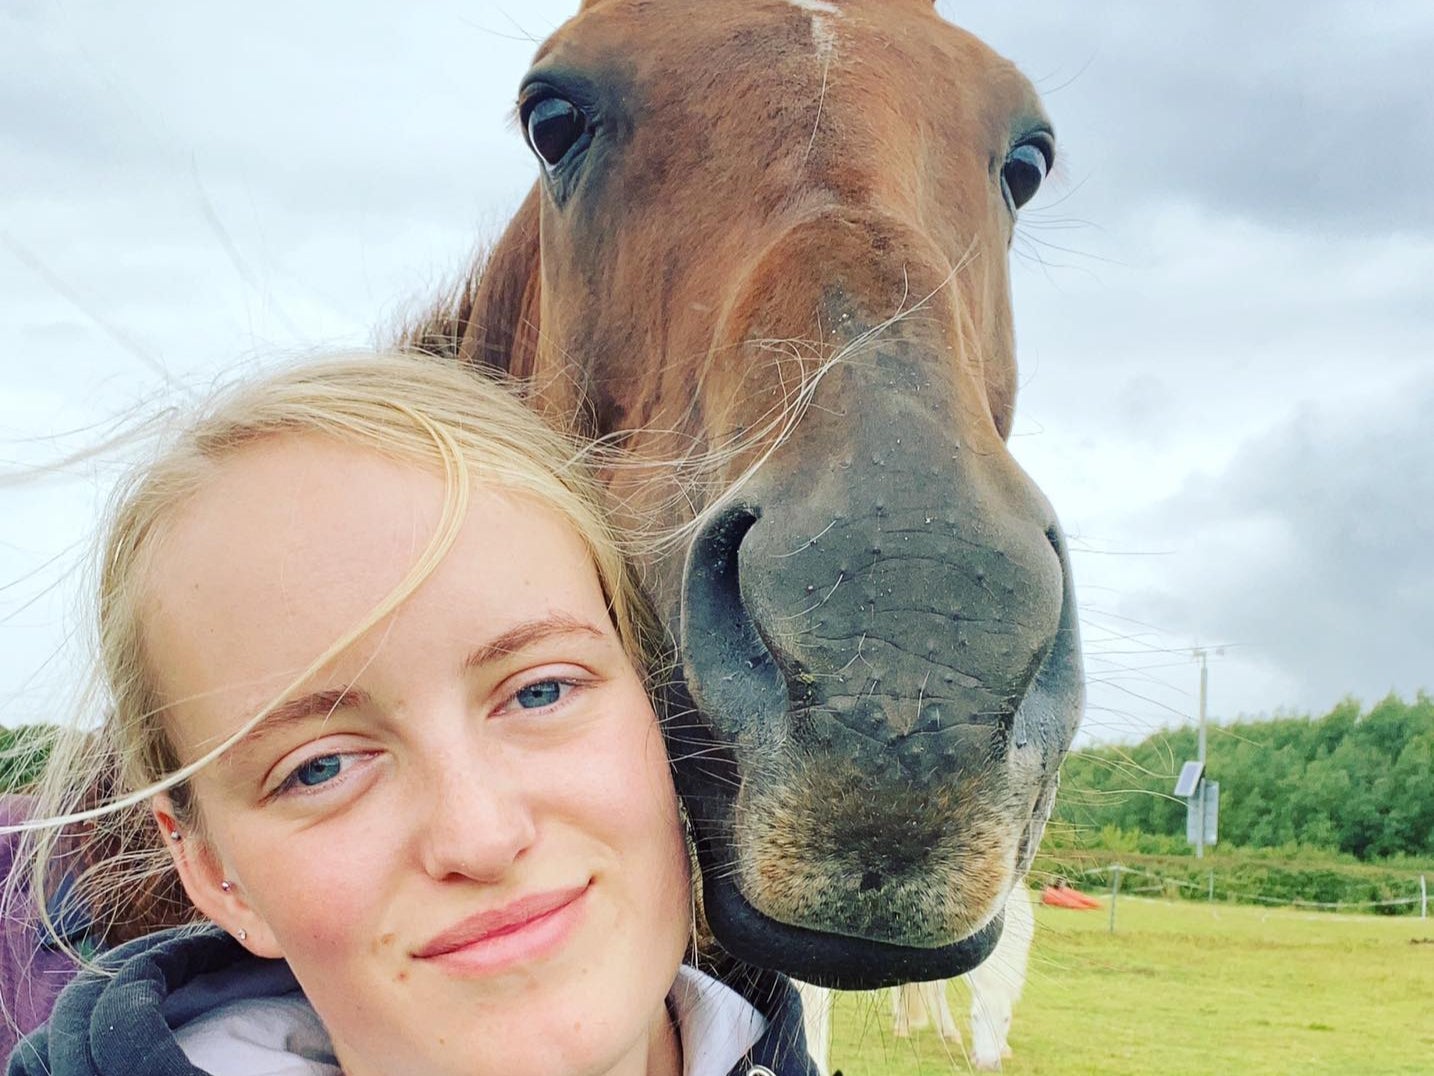 Keen horse rider Gracie Spinks, 23, was founded dead in a field in the Derbyshire village of Duckmanton